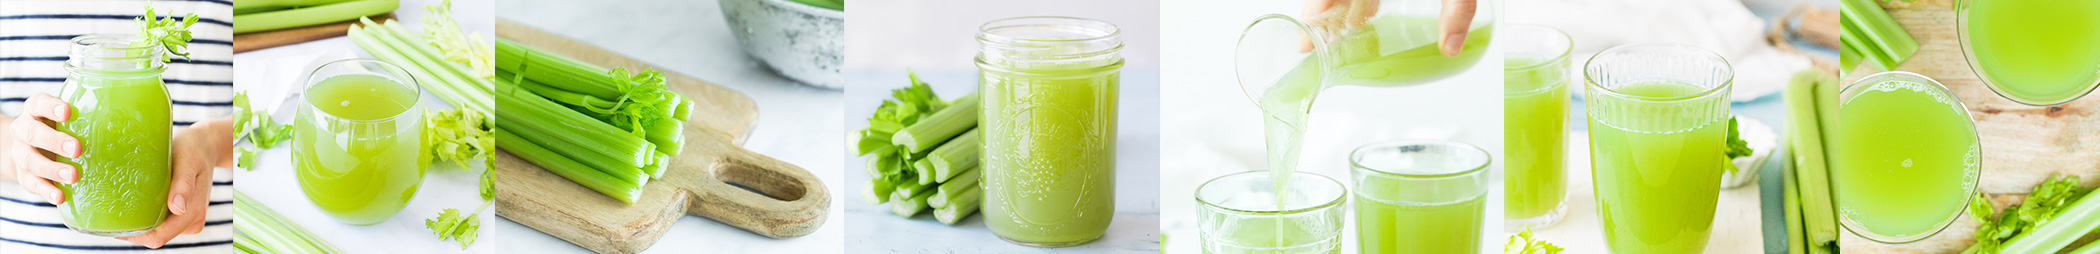 Celery Juice, The Most Powerful Medicine Of Our Time Healing Millions Woldwide (Book), by Anthony William